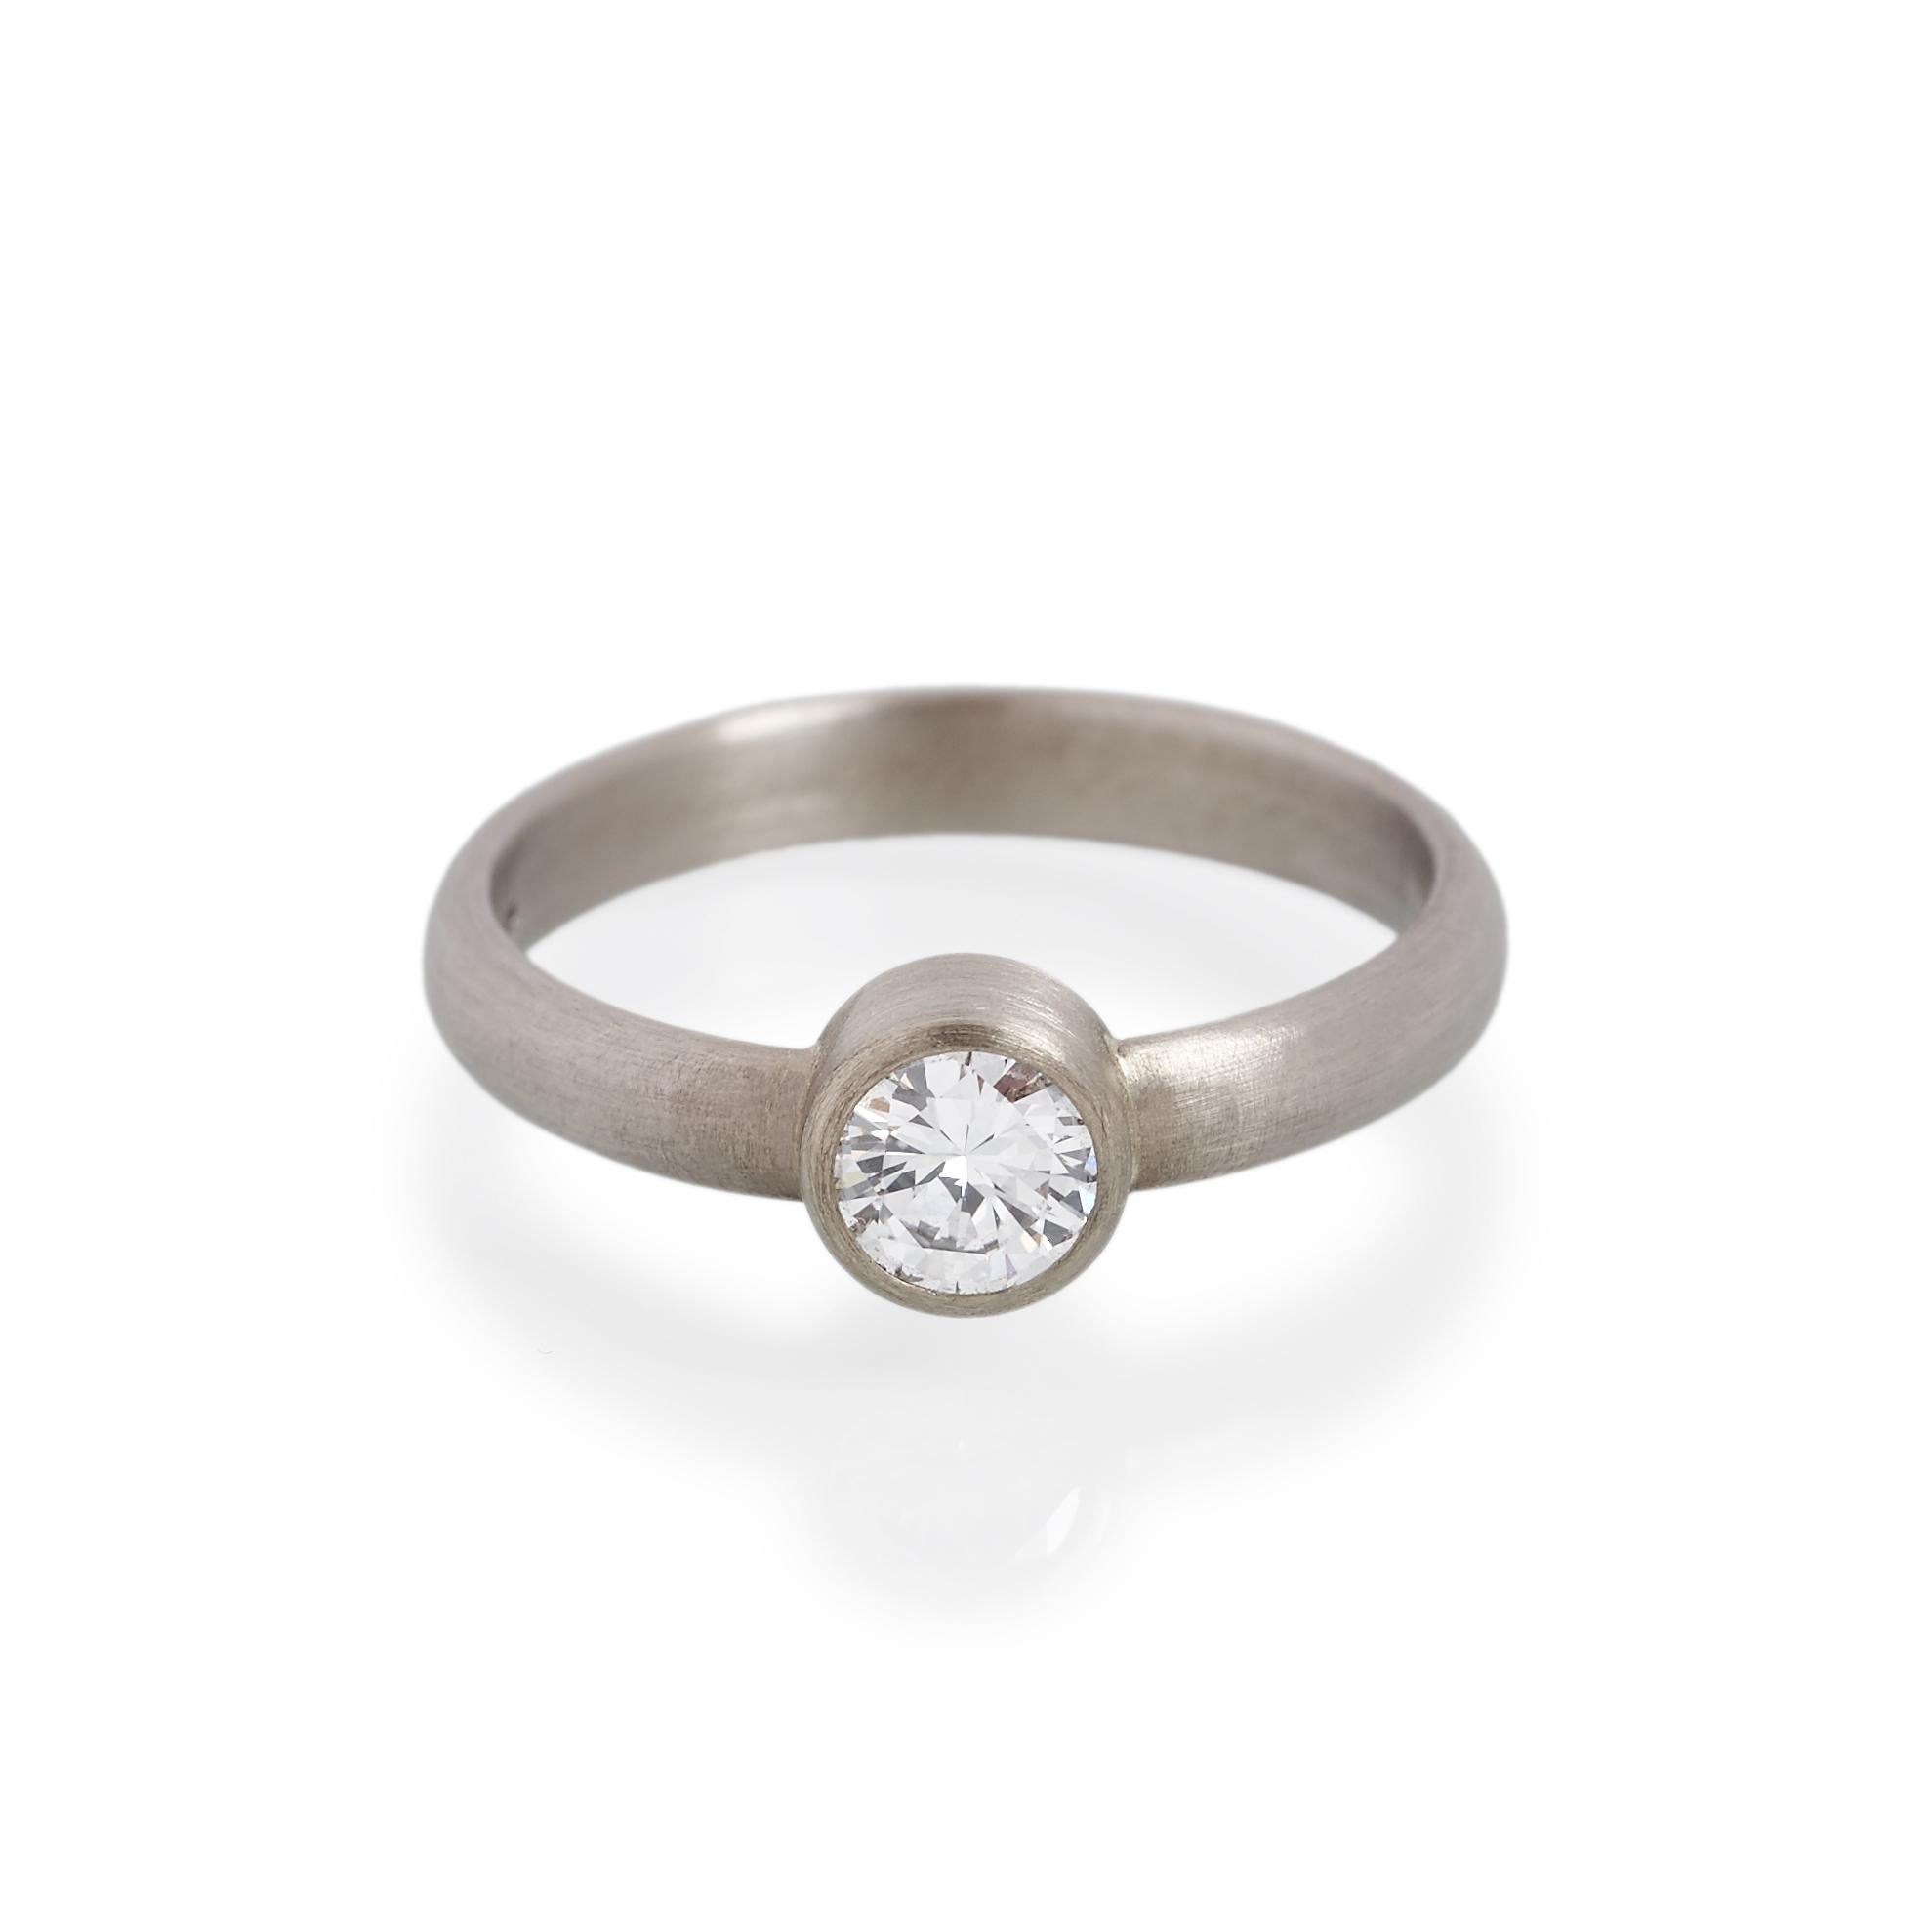 Old Brilliant cut diamond ring.
Ref: R14007

0.50cts brilliant cut diamond  Clarity VVS2  Colour E  
18ct white gold

Cadby & Co are a family business that specialise in reusing & up cycling old cut diamonds and fine gem stones. Deborah Cadby’s